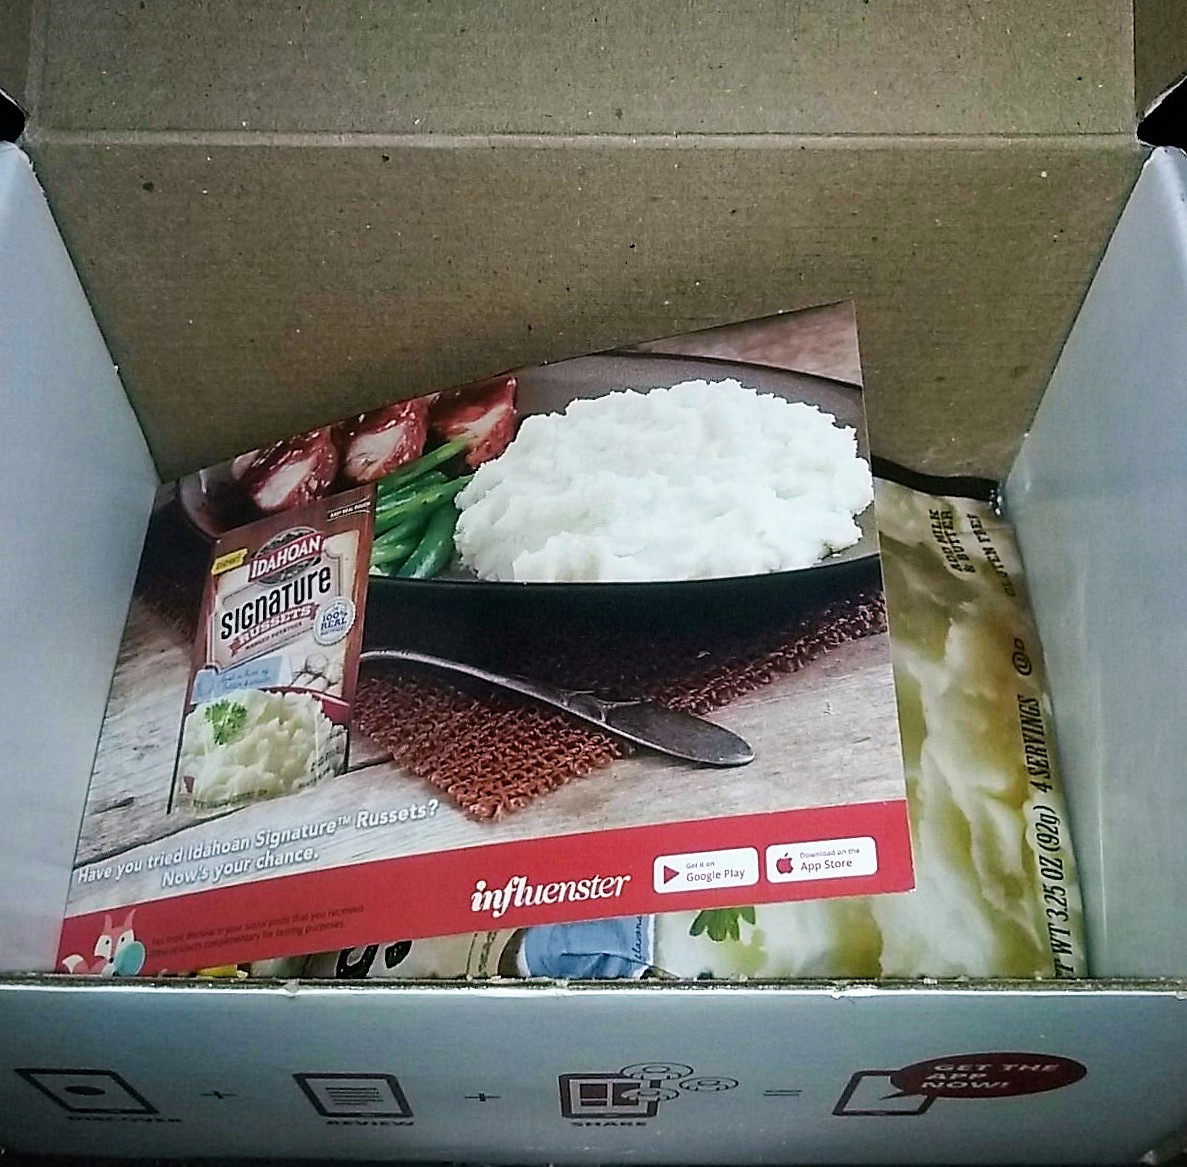 ©SandyKS This photo is of the last Vox Box I recived from Influenster.